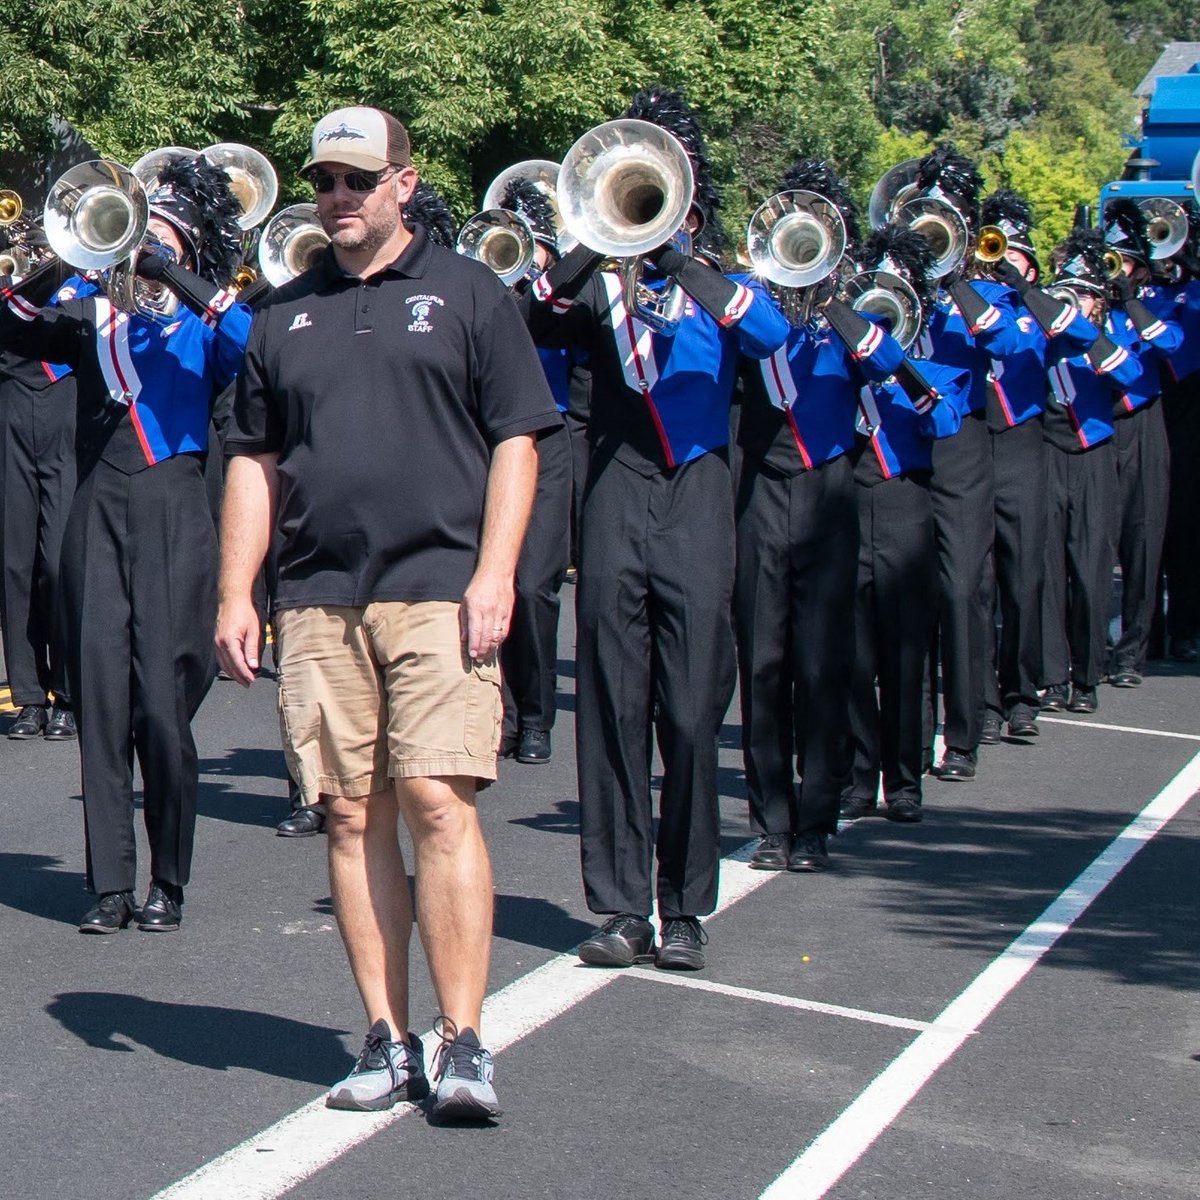 Don't miss your #CHSMarchingWarriors at the Louisville Labor Day Parade on Monday, Sept 5 at 10am on Main Street! #LafayetteColorado #LouisvilleColorado